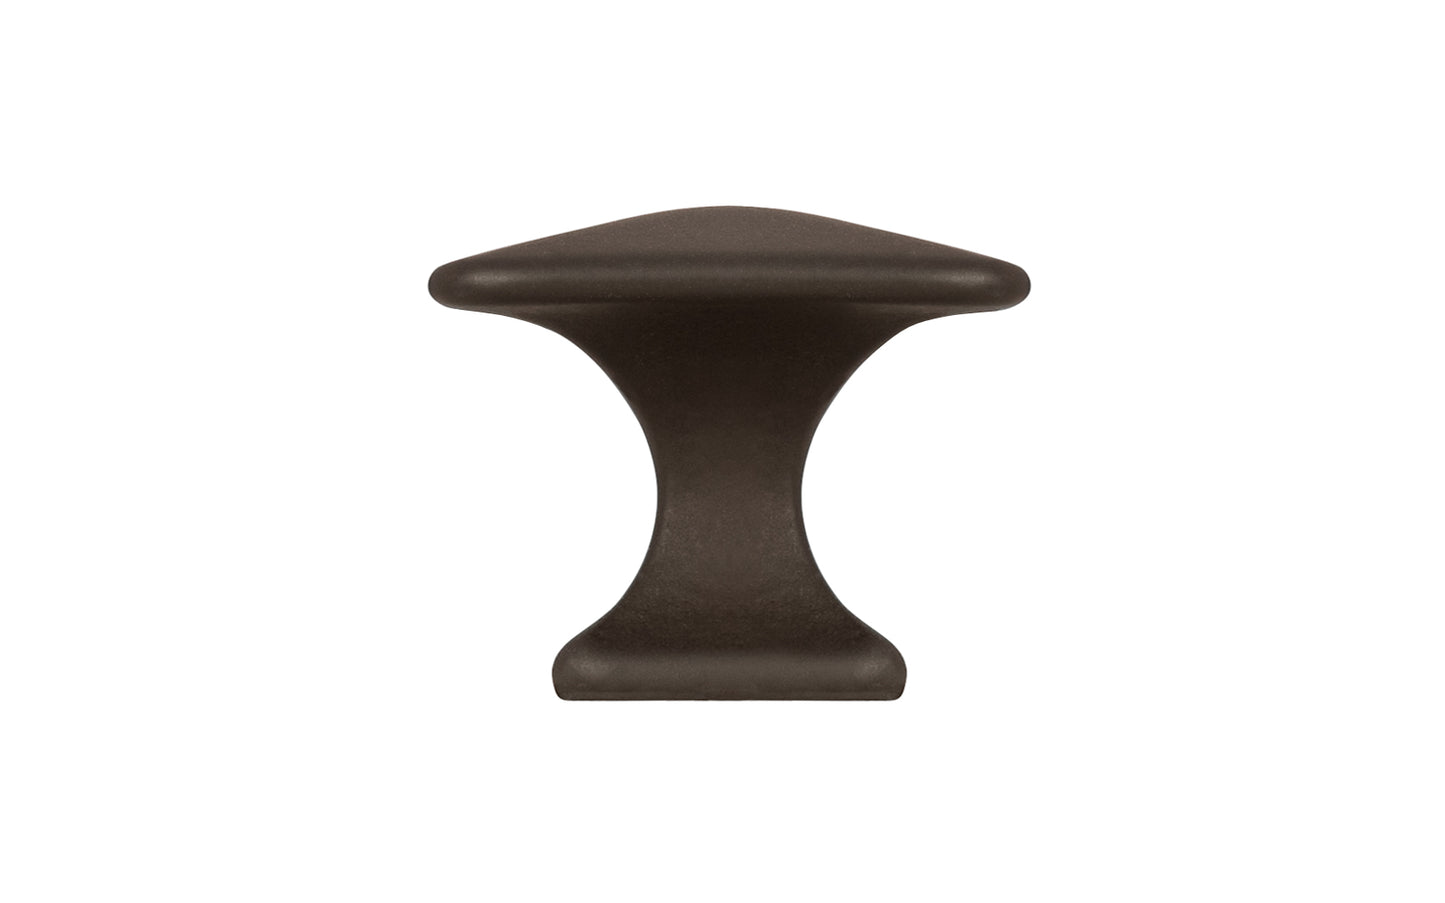 Vintage-style Hardware · Solid Brass Pyramid Shape Square Cabinet Knob ~ 1" size knob. Made of solid brass, this stylish knob has a smooth & weighty feel. Mission-style, Arts & Crafts style of hardware. Oil Rubbed Bronze Finish